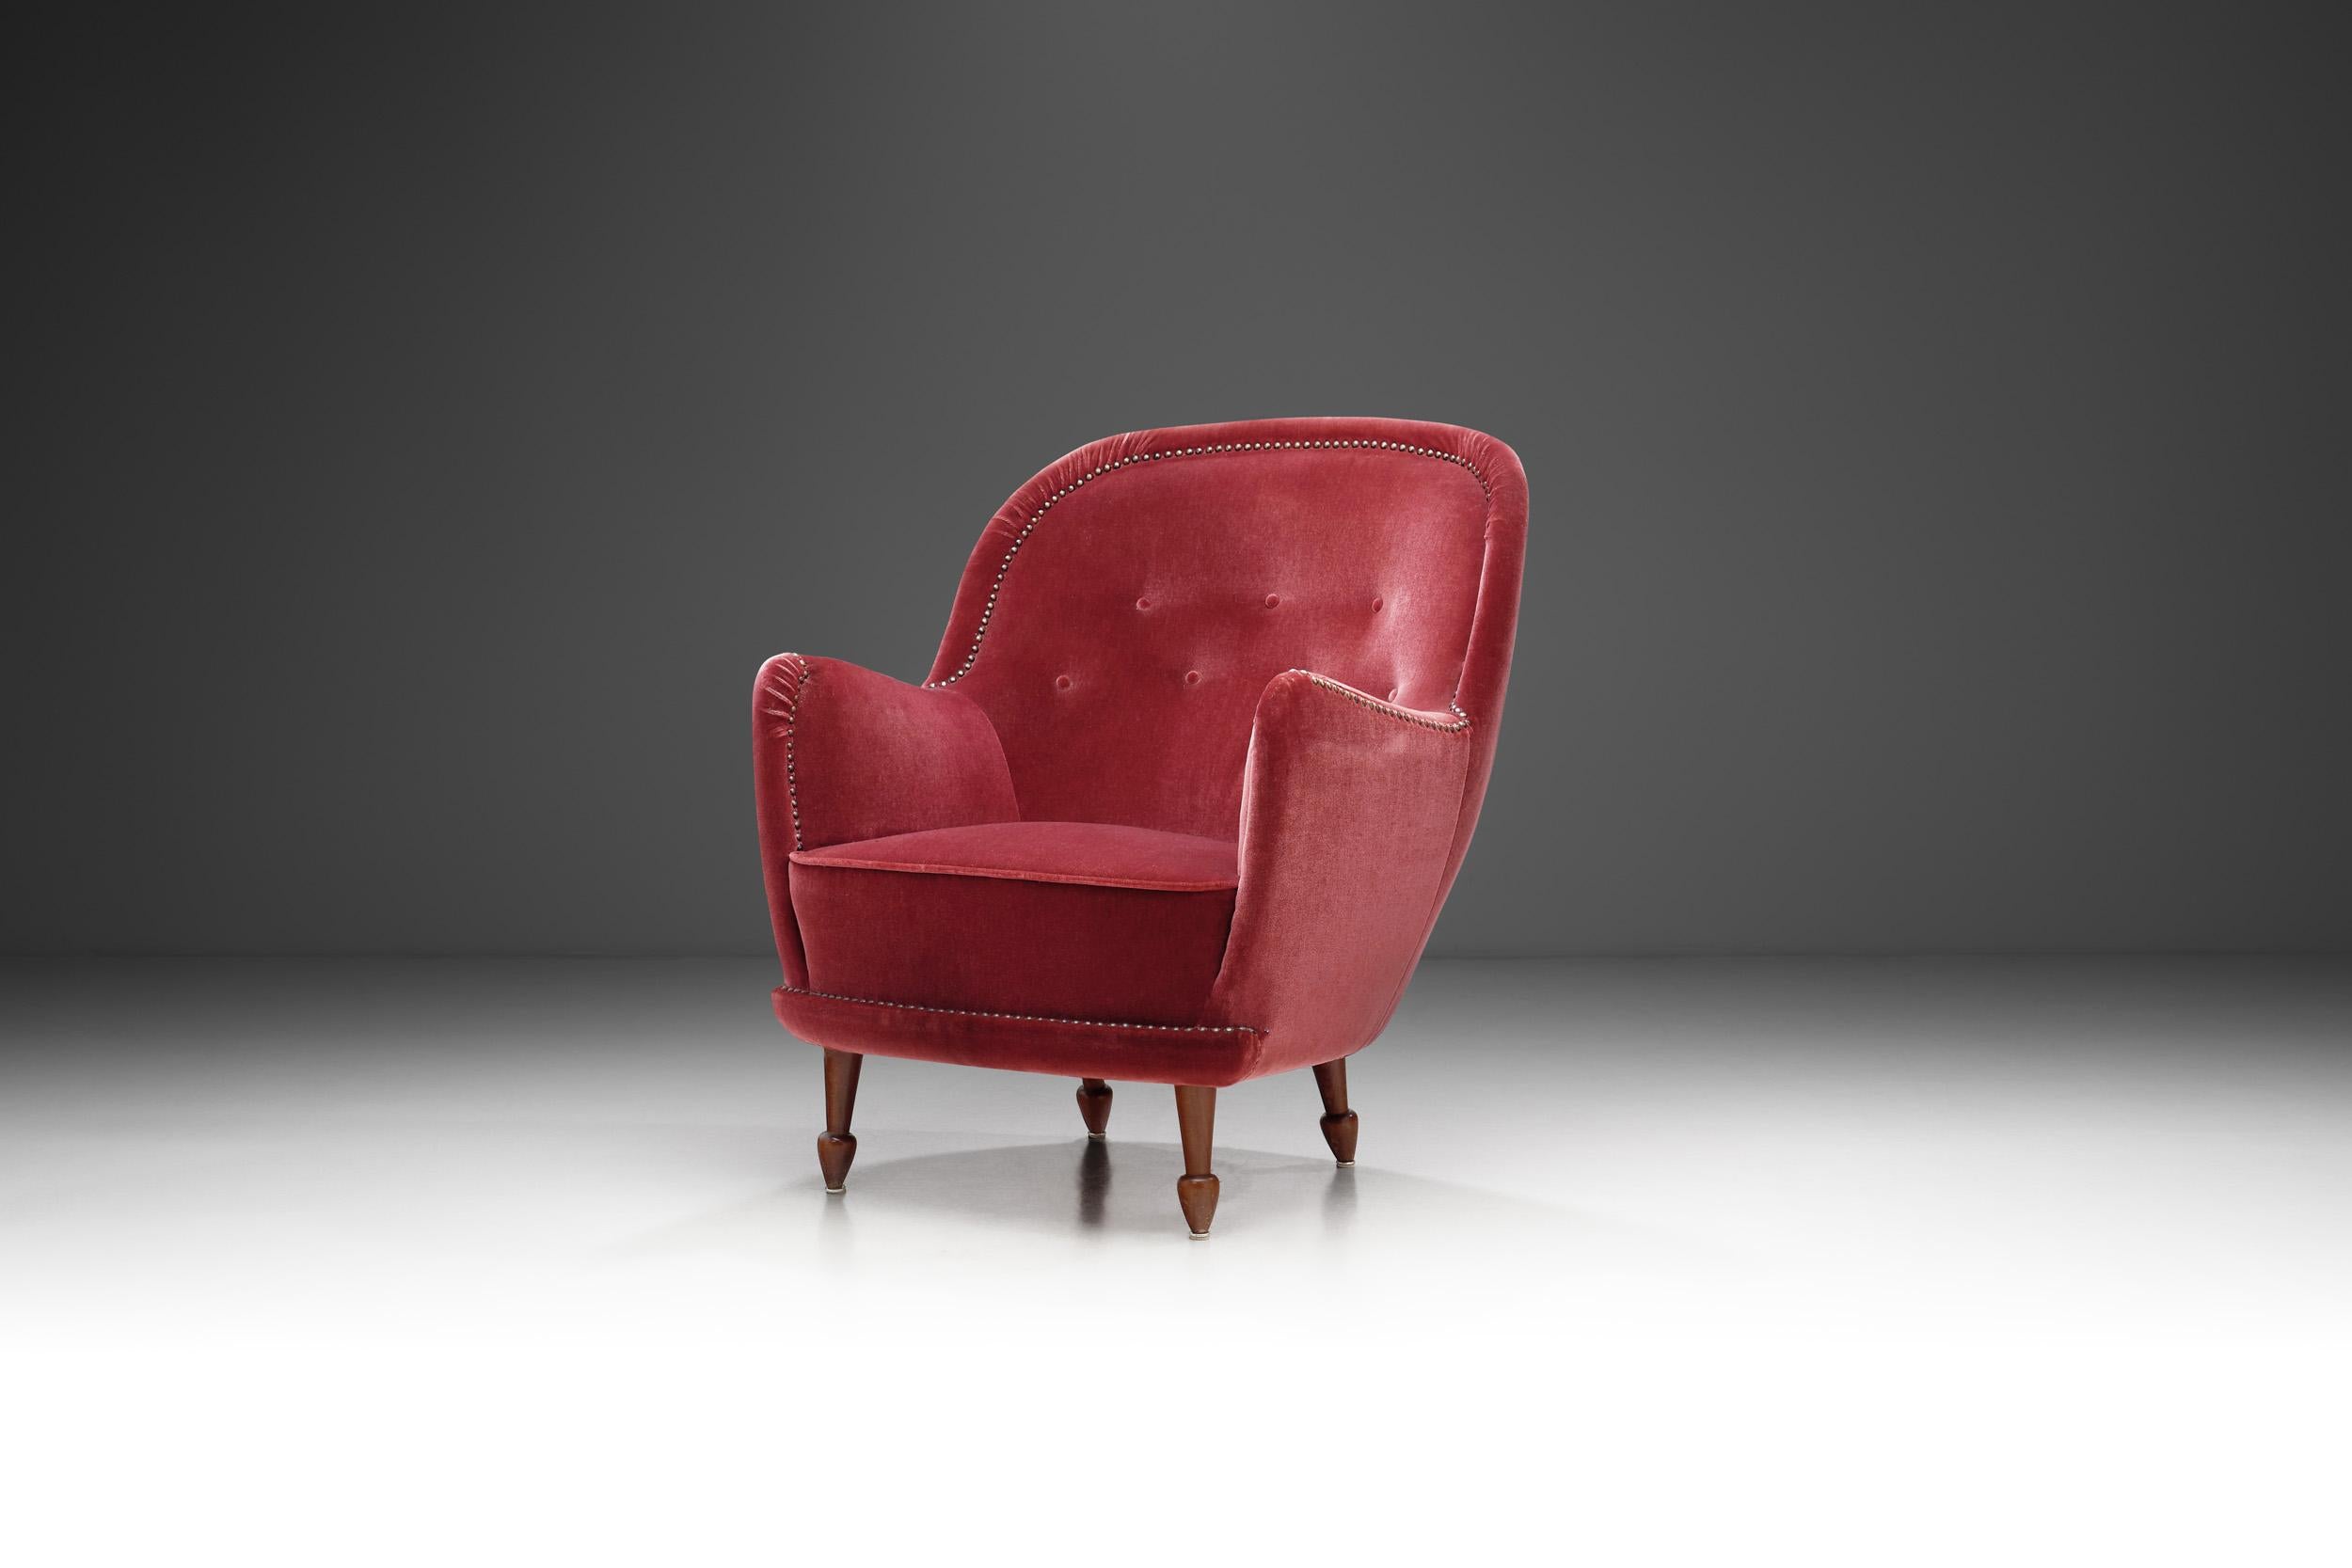 In the realm of mid-20th century Swedish furniture design, the name Carl Cederholm stands out as a luminary, who favoured the classic elegance of Swedish furniture design and combined it with modern elements. This characteristic armchair from the